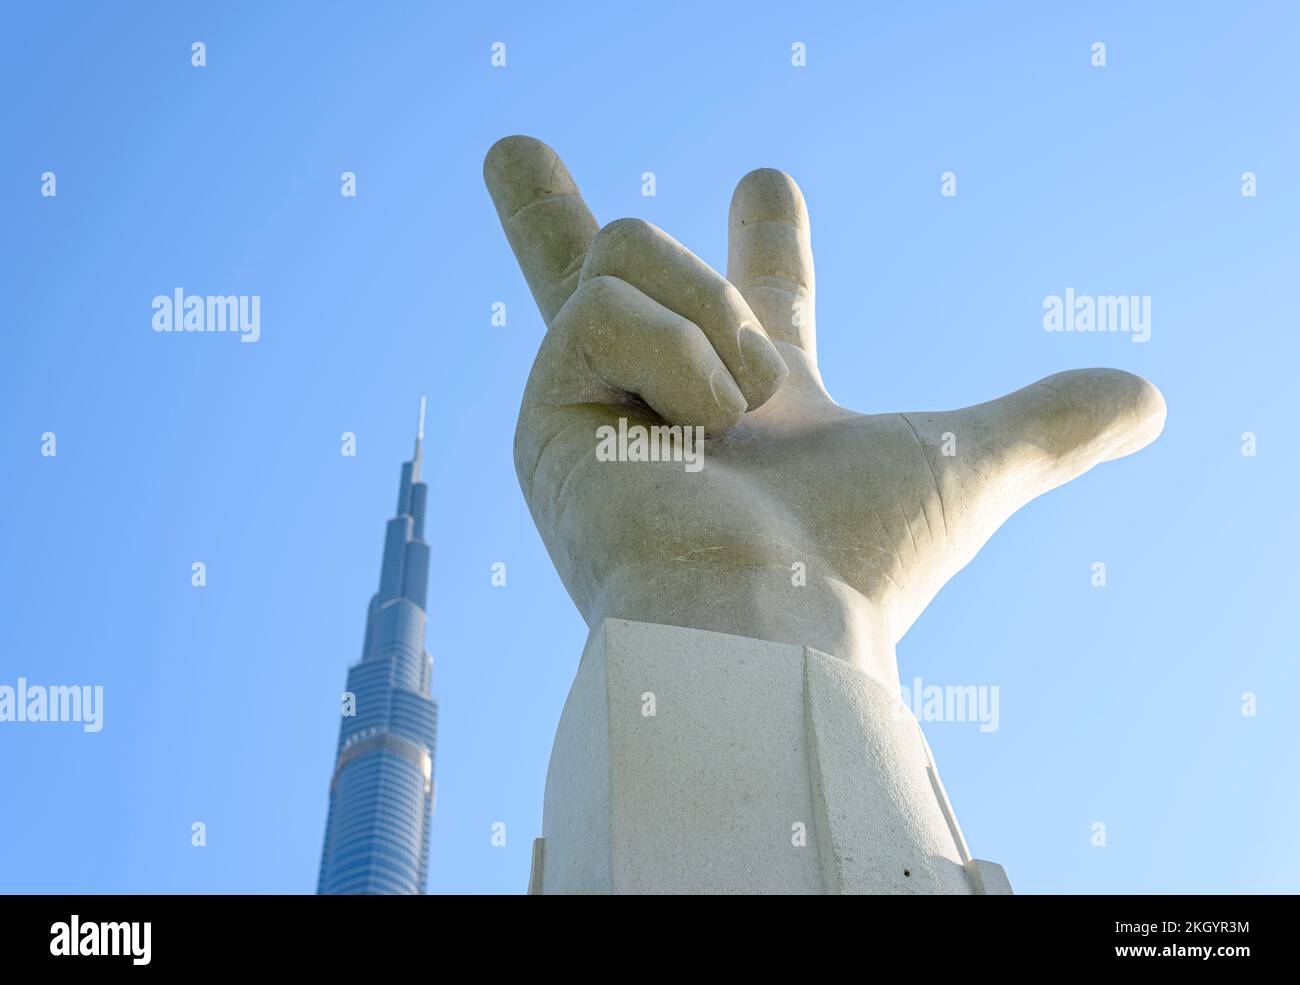 The three-finger salute sculpture made famous by His Highness Sheikh Mohammed bin Rashid Al Maktoum. It symbolises WIN VICTORY LOVE and is an innovati Stock Photo